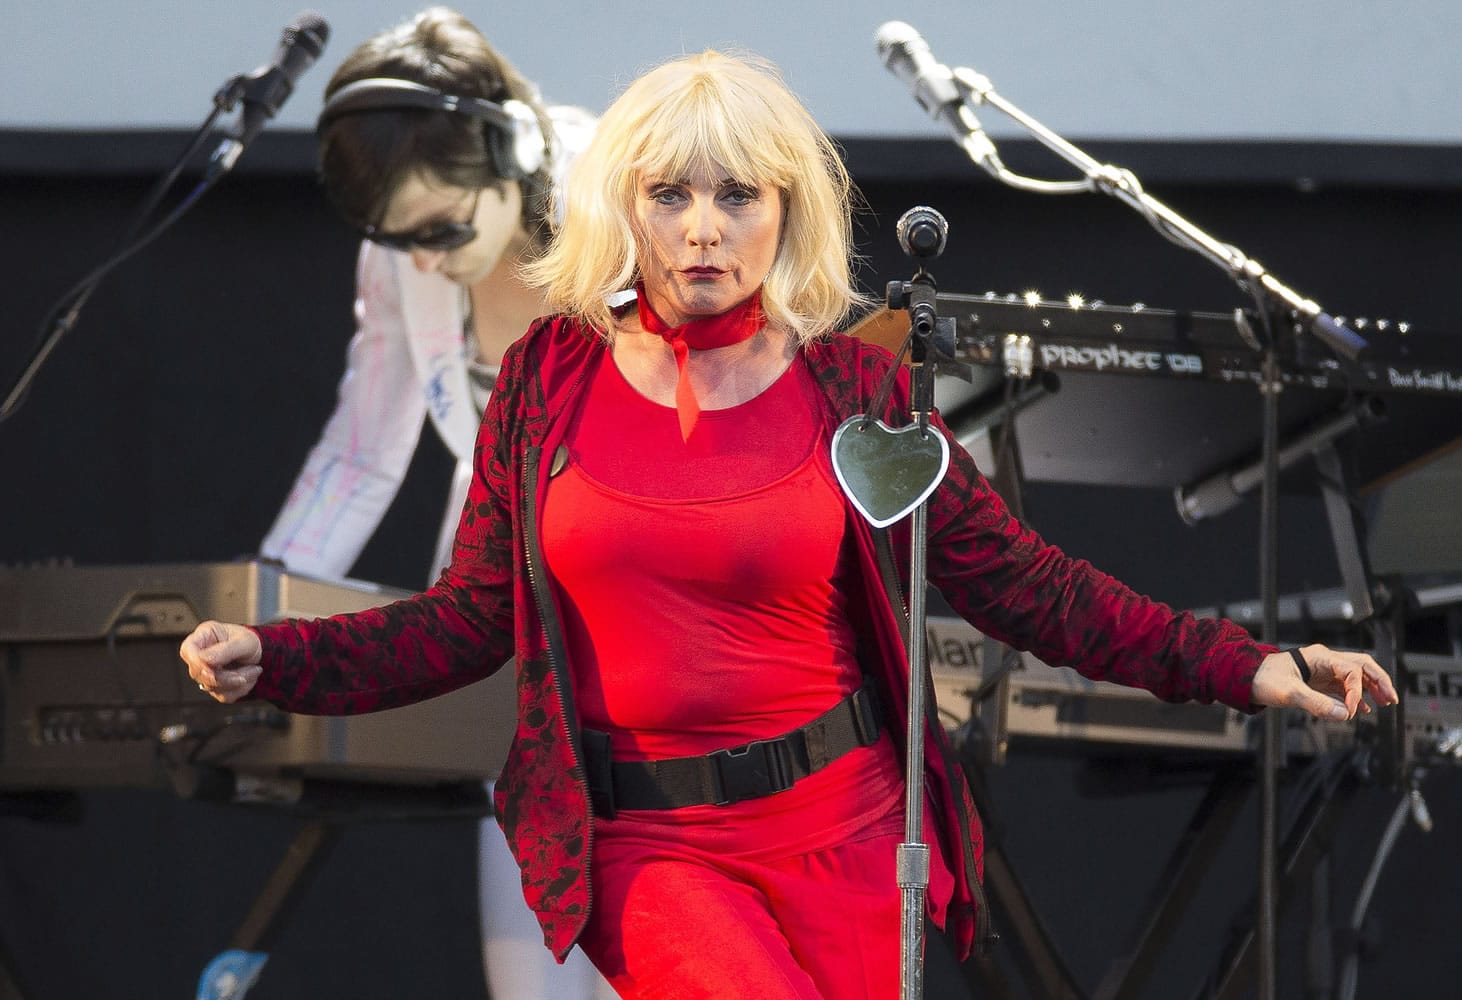 Debbie Harry
Will perform at the annual John Lennon tribute